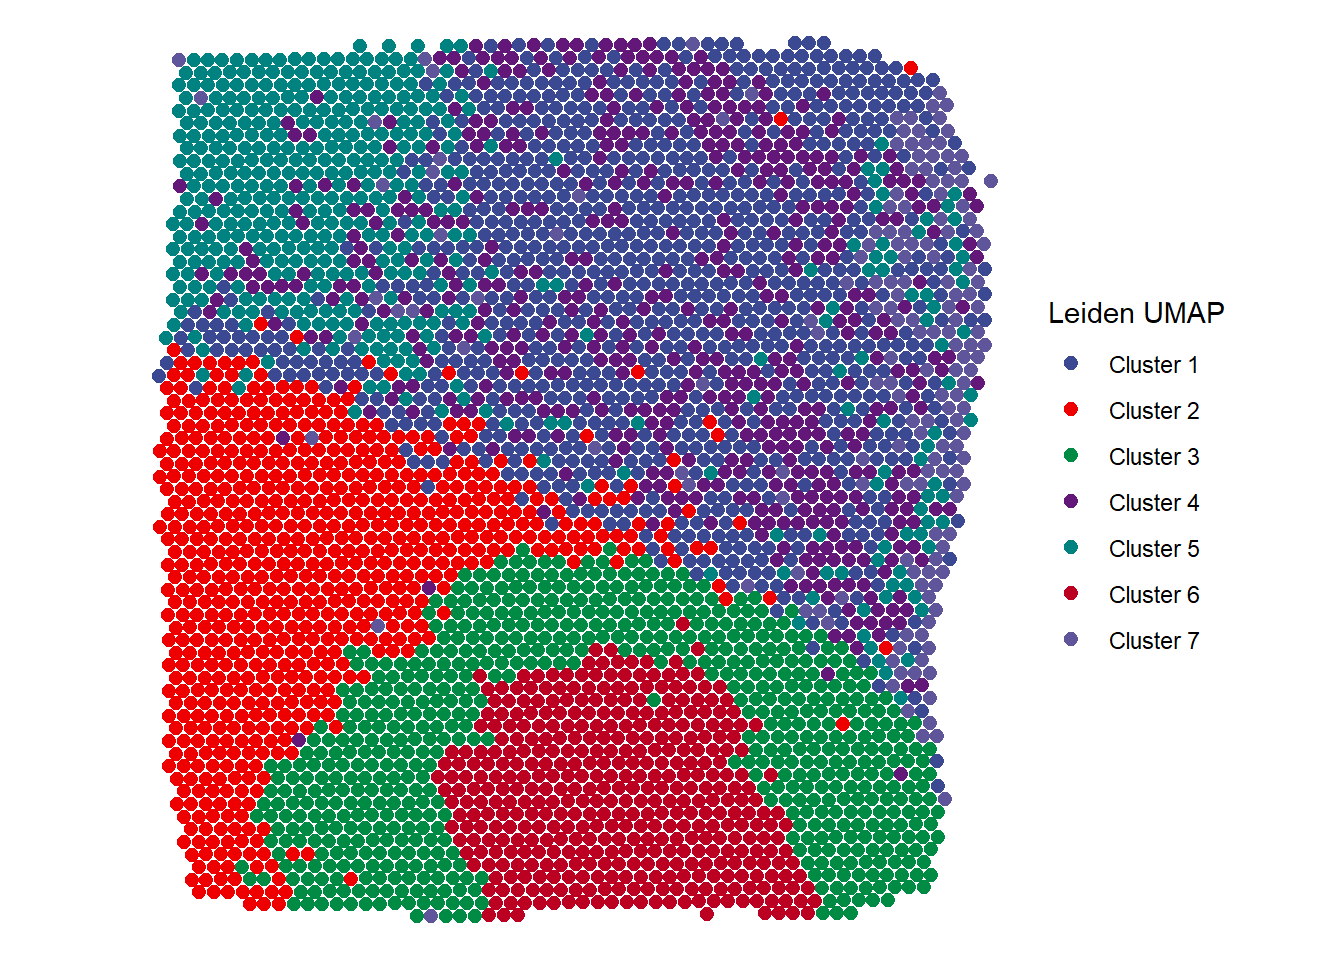 Figure 2.1 Easy visualization of different clustering results - Leiden UMAP